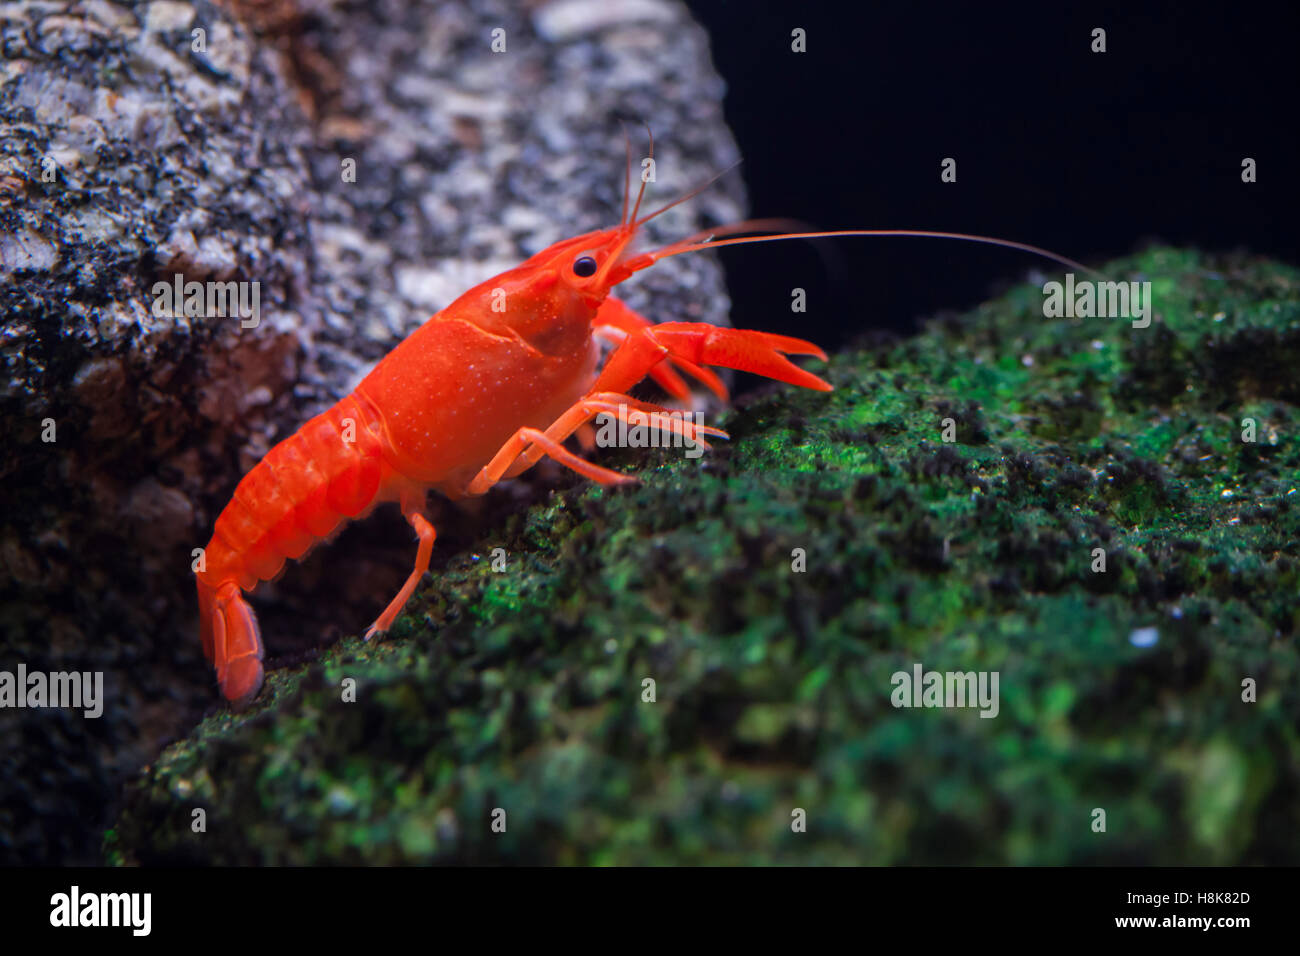 Red swamp crawfish (Procambarus clarkii), also known as the Louisiana crawfish. Stock Photo